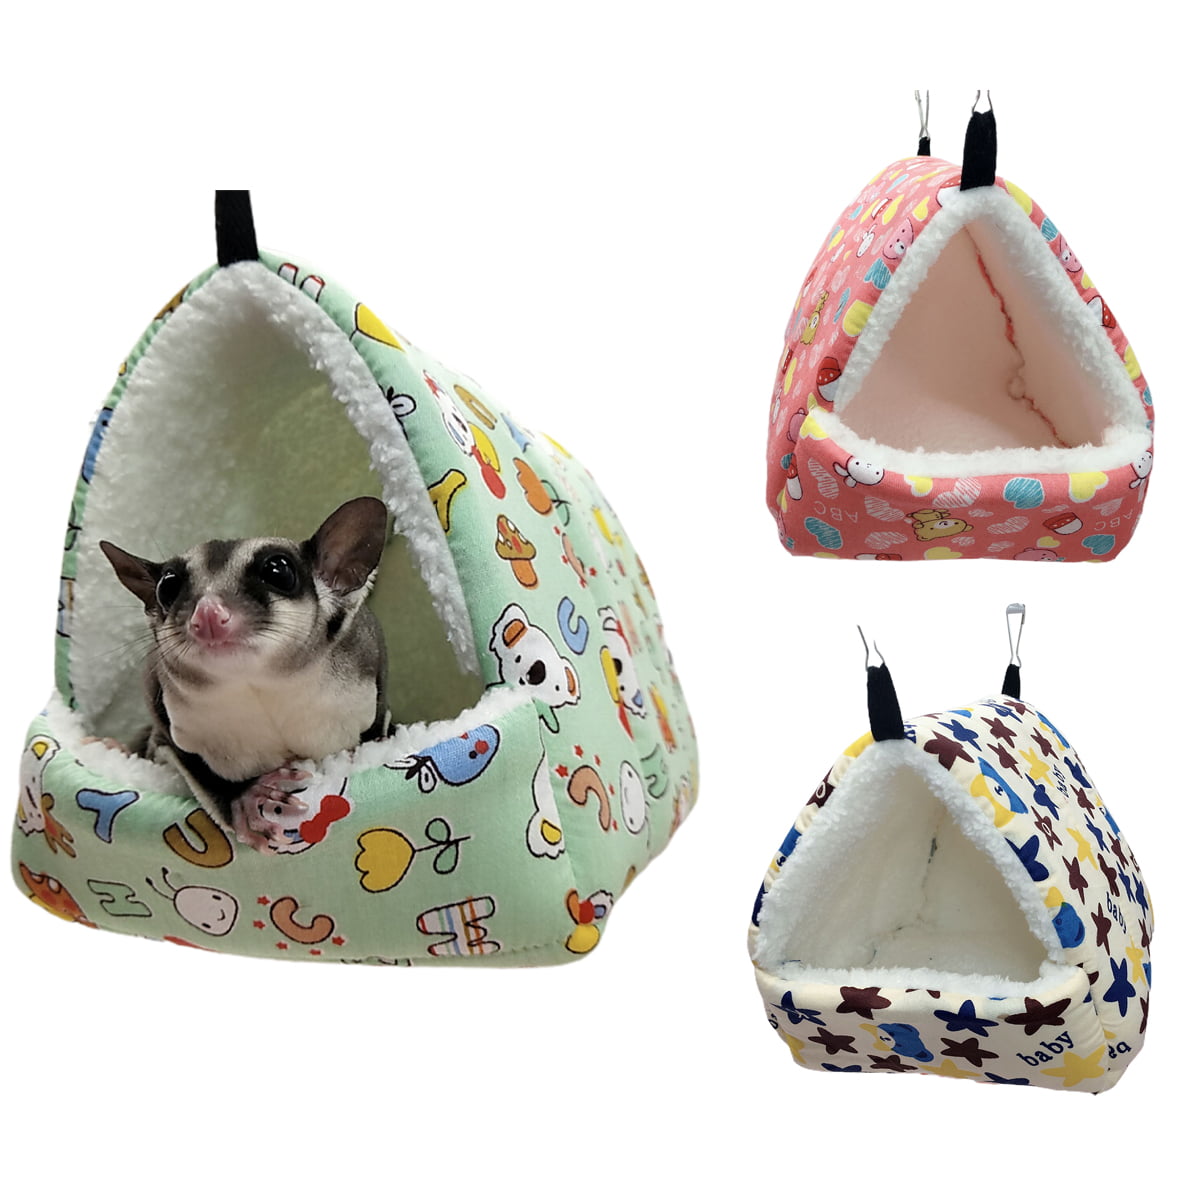 Guinea Pig Hamster Bird Squirrel Ferret Suger Glider Hedgehog Chinchillas Bed Hammock Winter Warm Small Pet Animal Hanging Home House Cotton Cage Nest Tent 